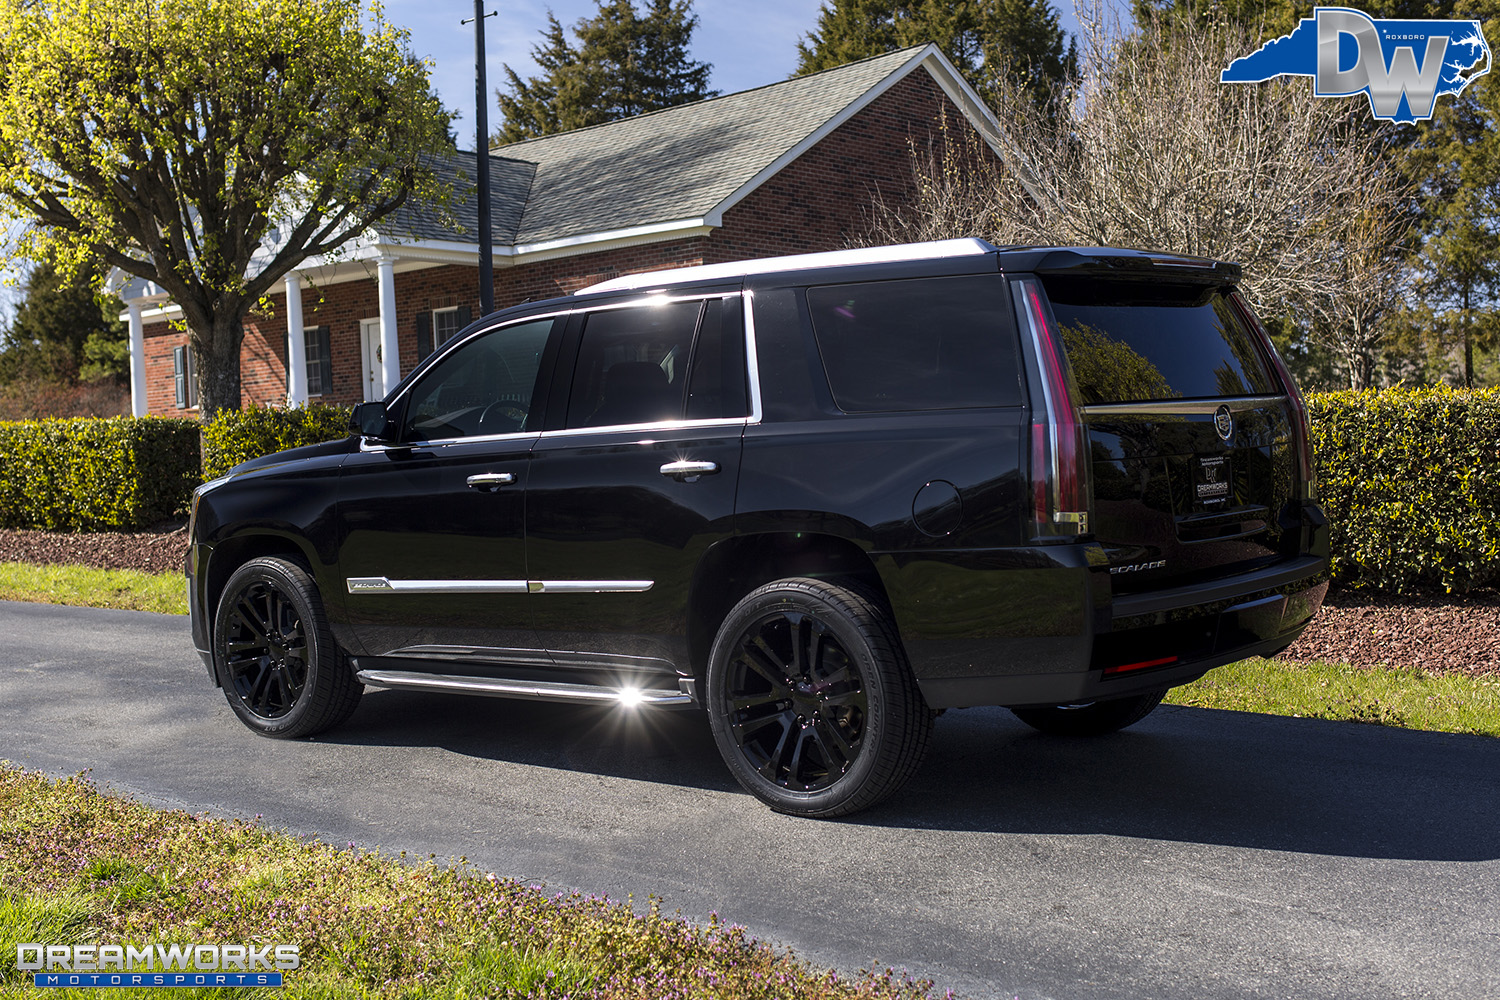 Blacked-Out-Escalade-Dreamworks-Motorsports-11.jpg